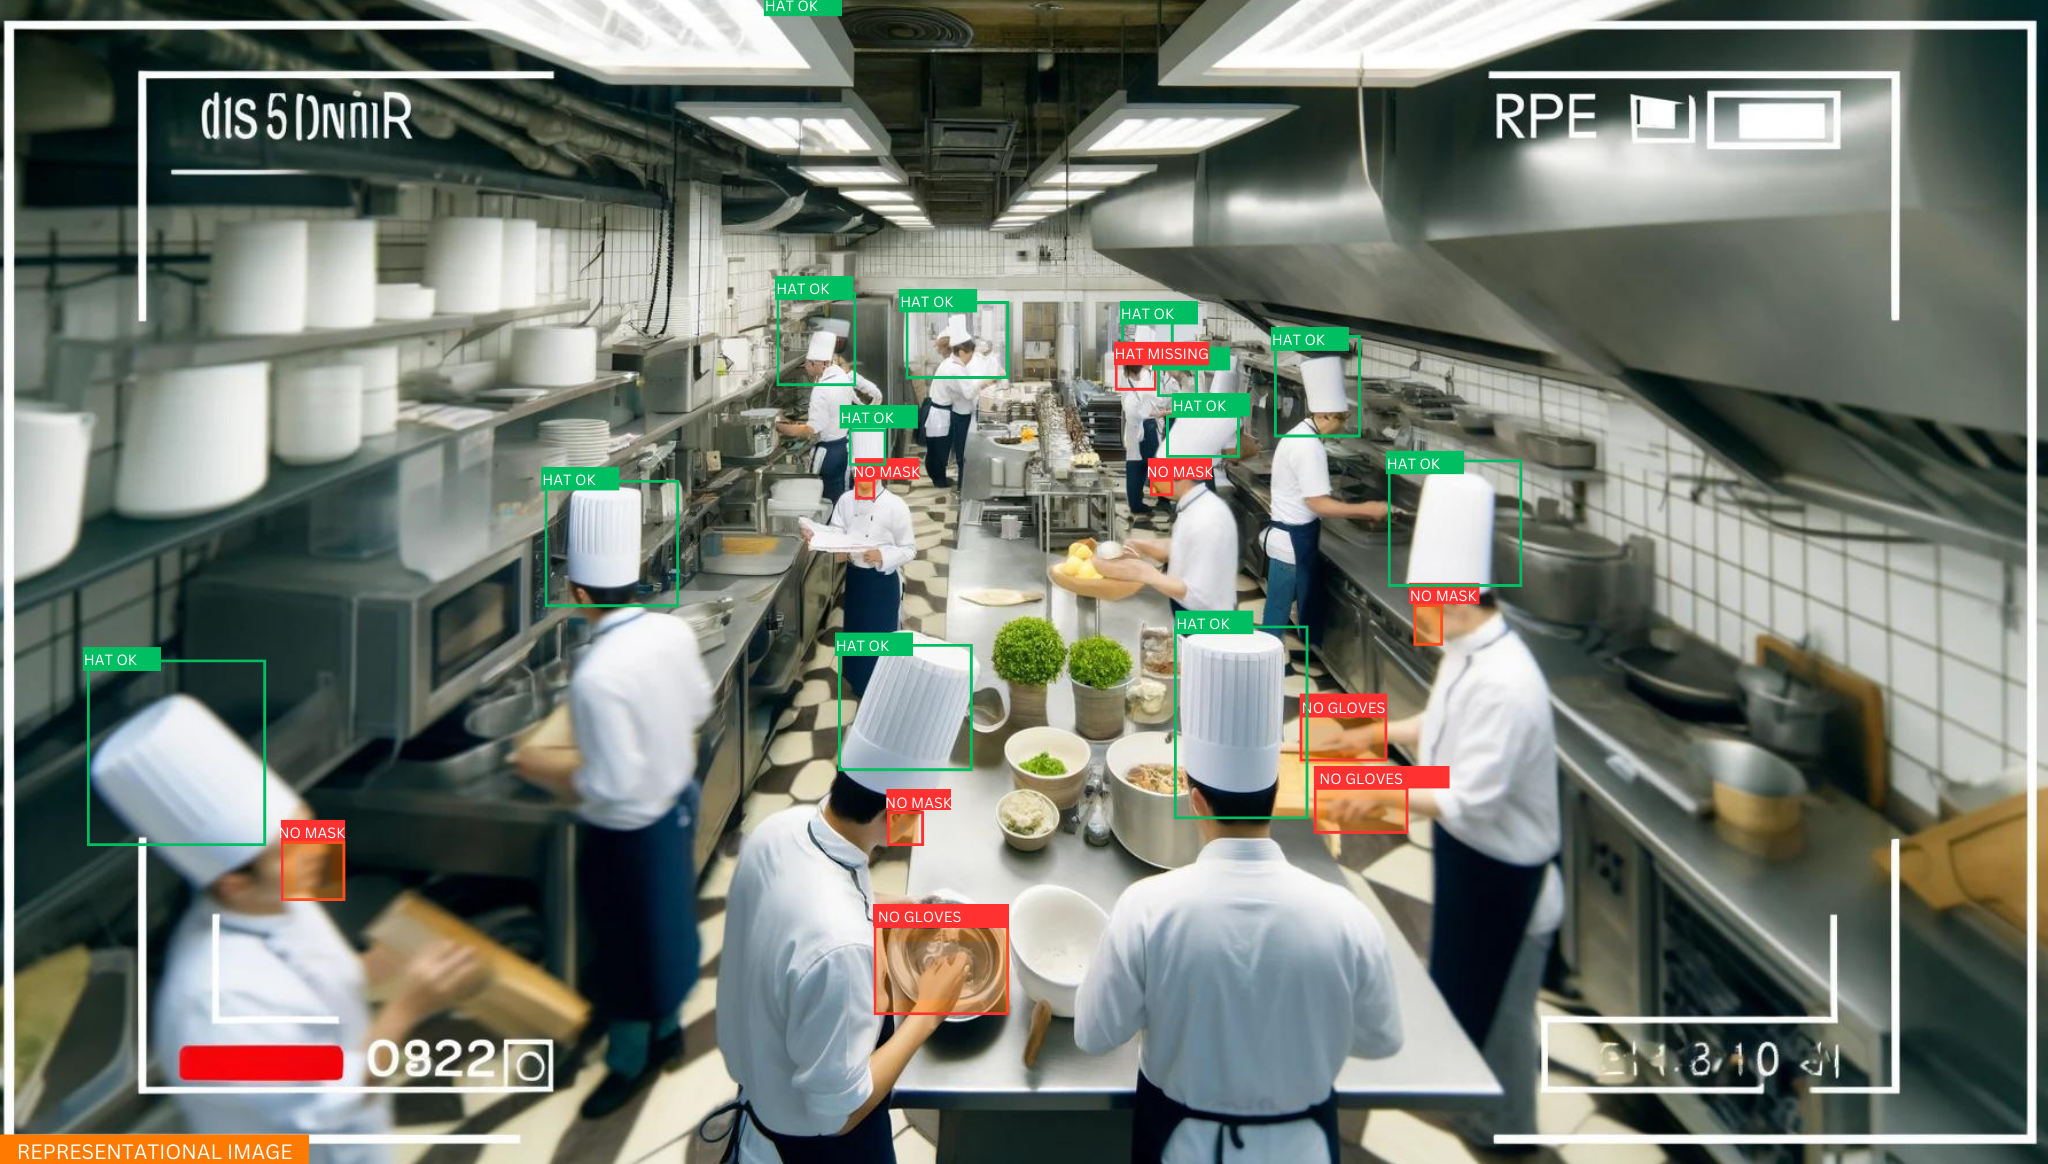 Vision AI powered PPE Detection for Hotel Kitchens